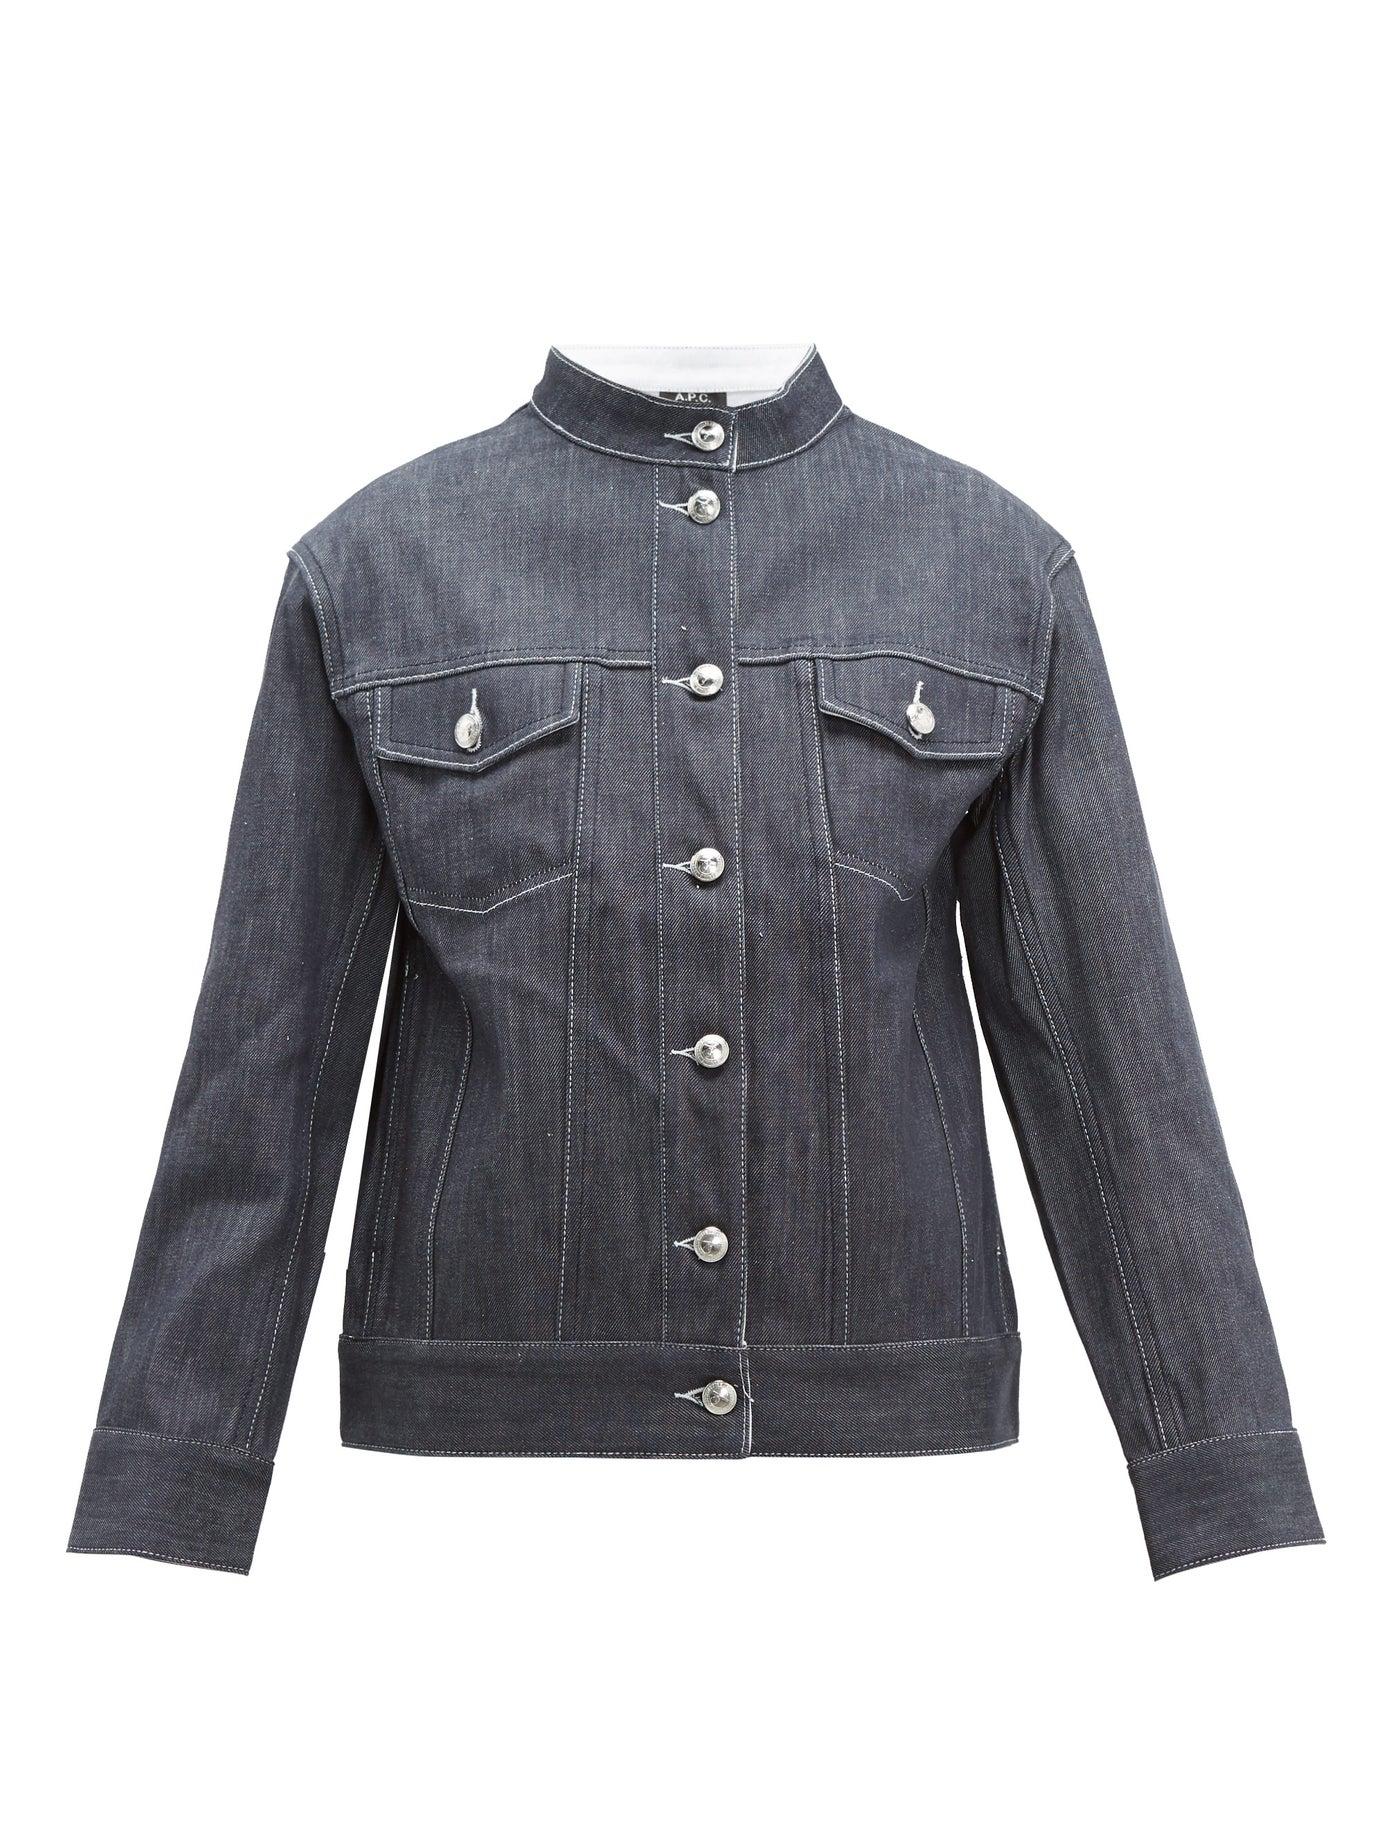 A.P.C. Galway Band Collar Denim Jacket in Blue - Lyst